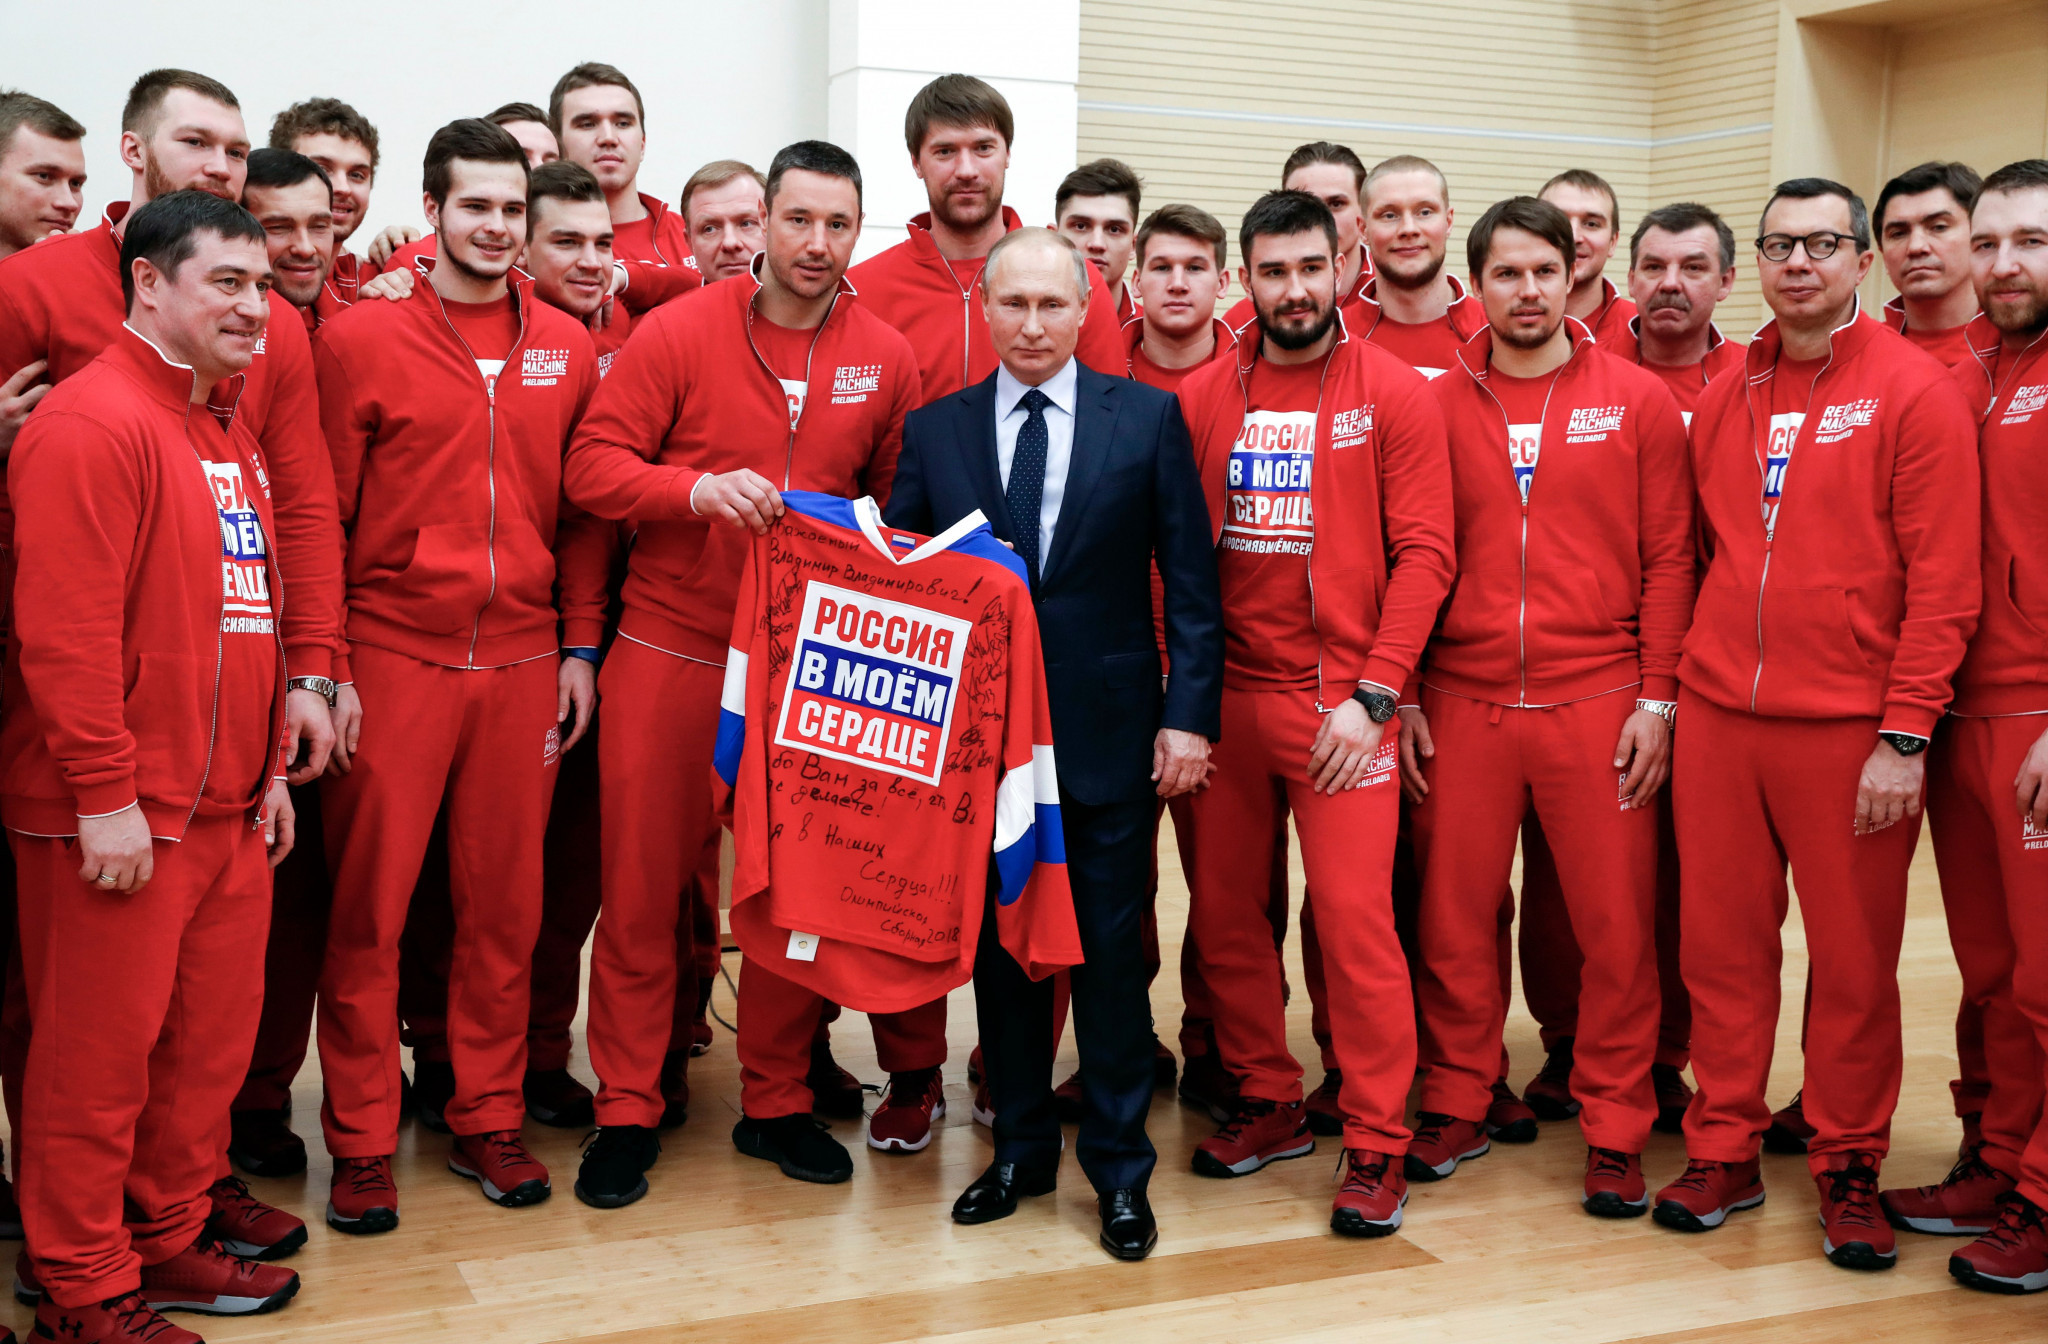 President Vladimir Putin, centre, apologised to Russia athletes for not protecting them more from the doping scandal when he met some of them due to compete under the OAR banner at Pyeongchang 2018 ©Getty Images